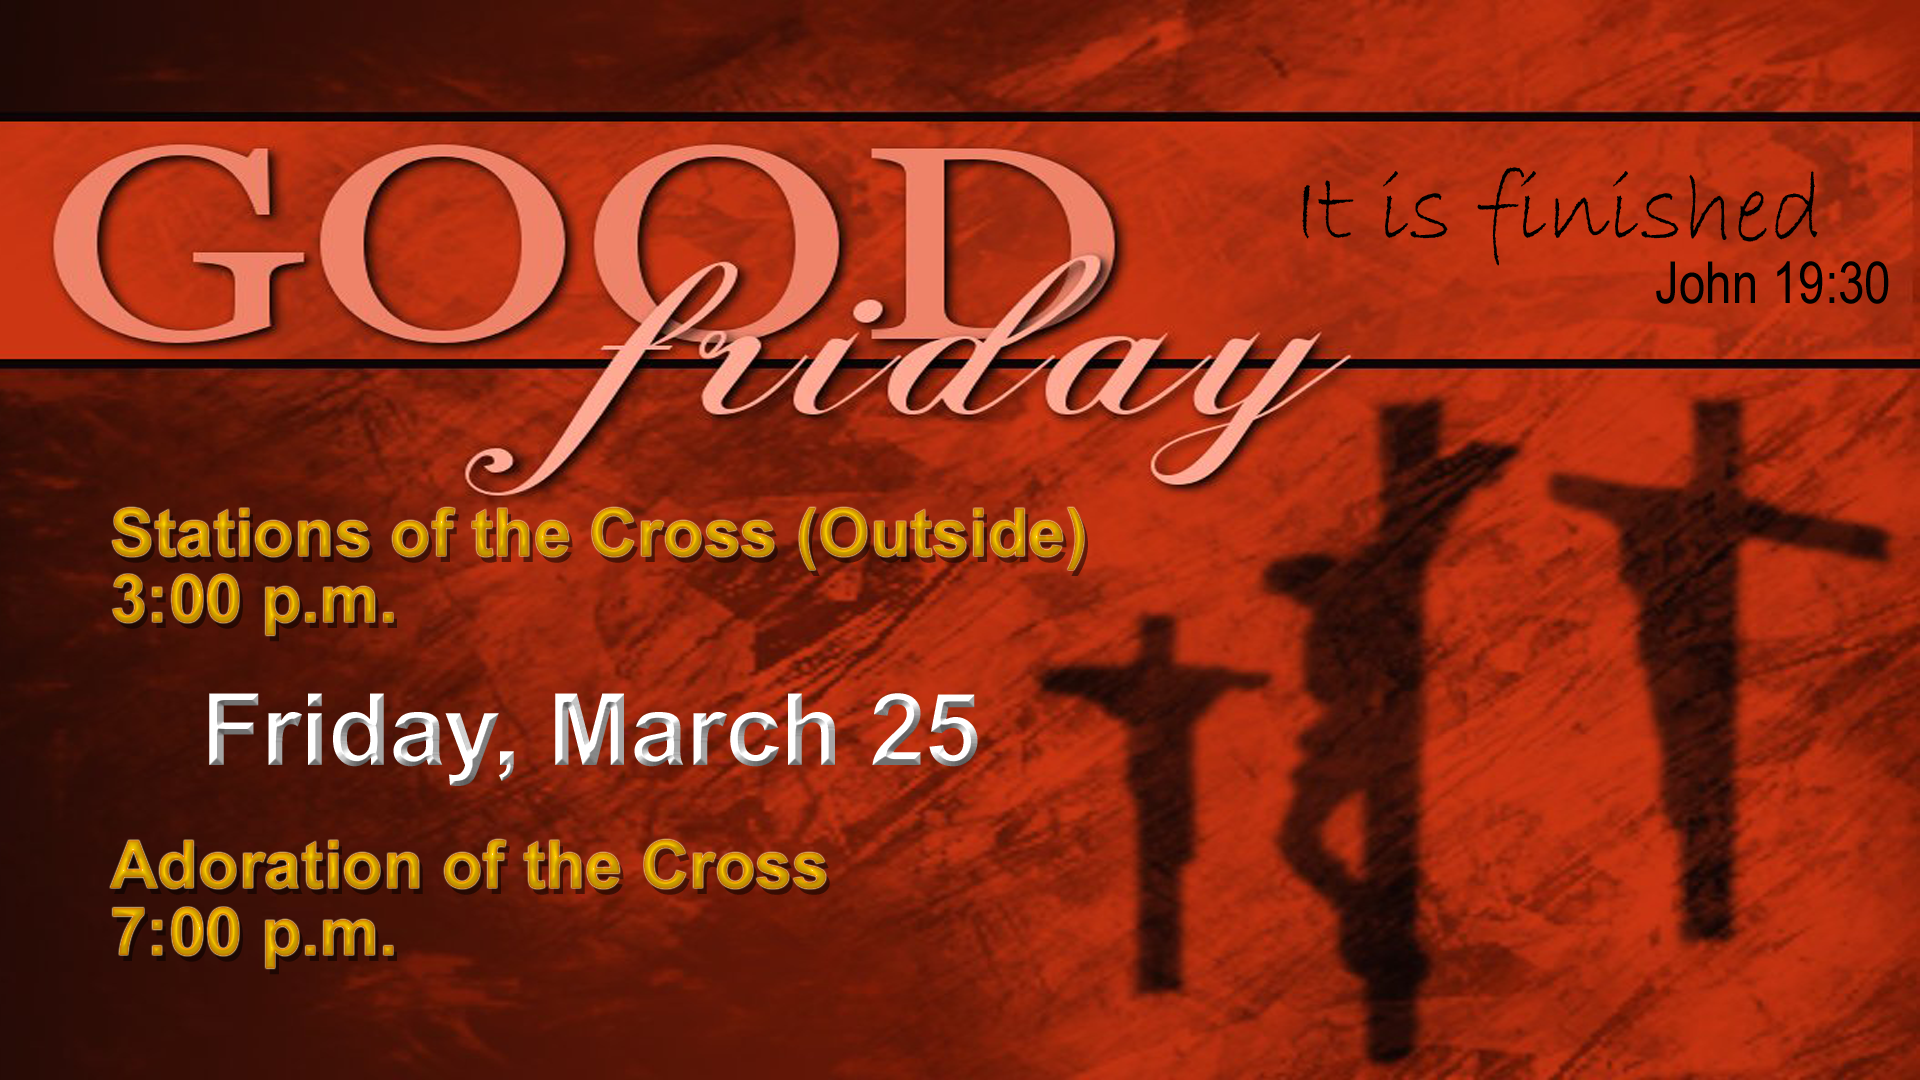 Good friday wishes